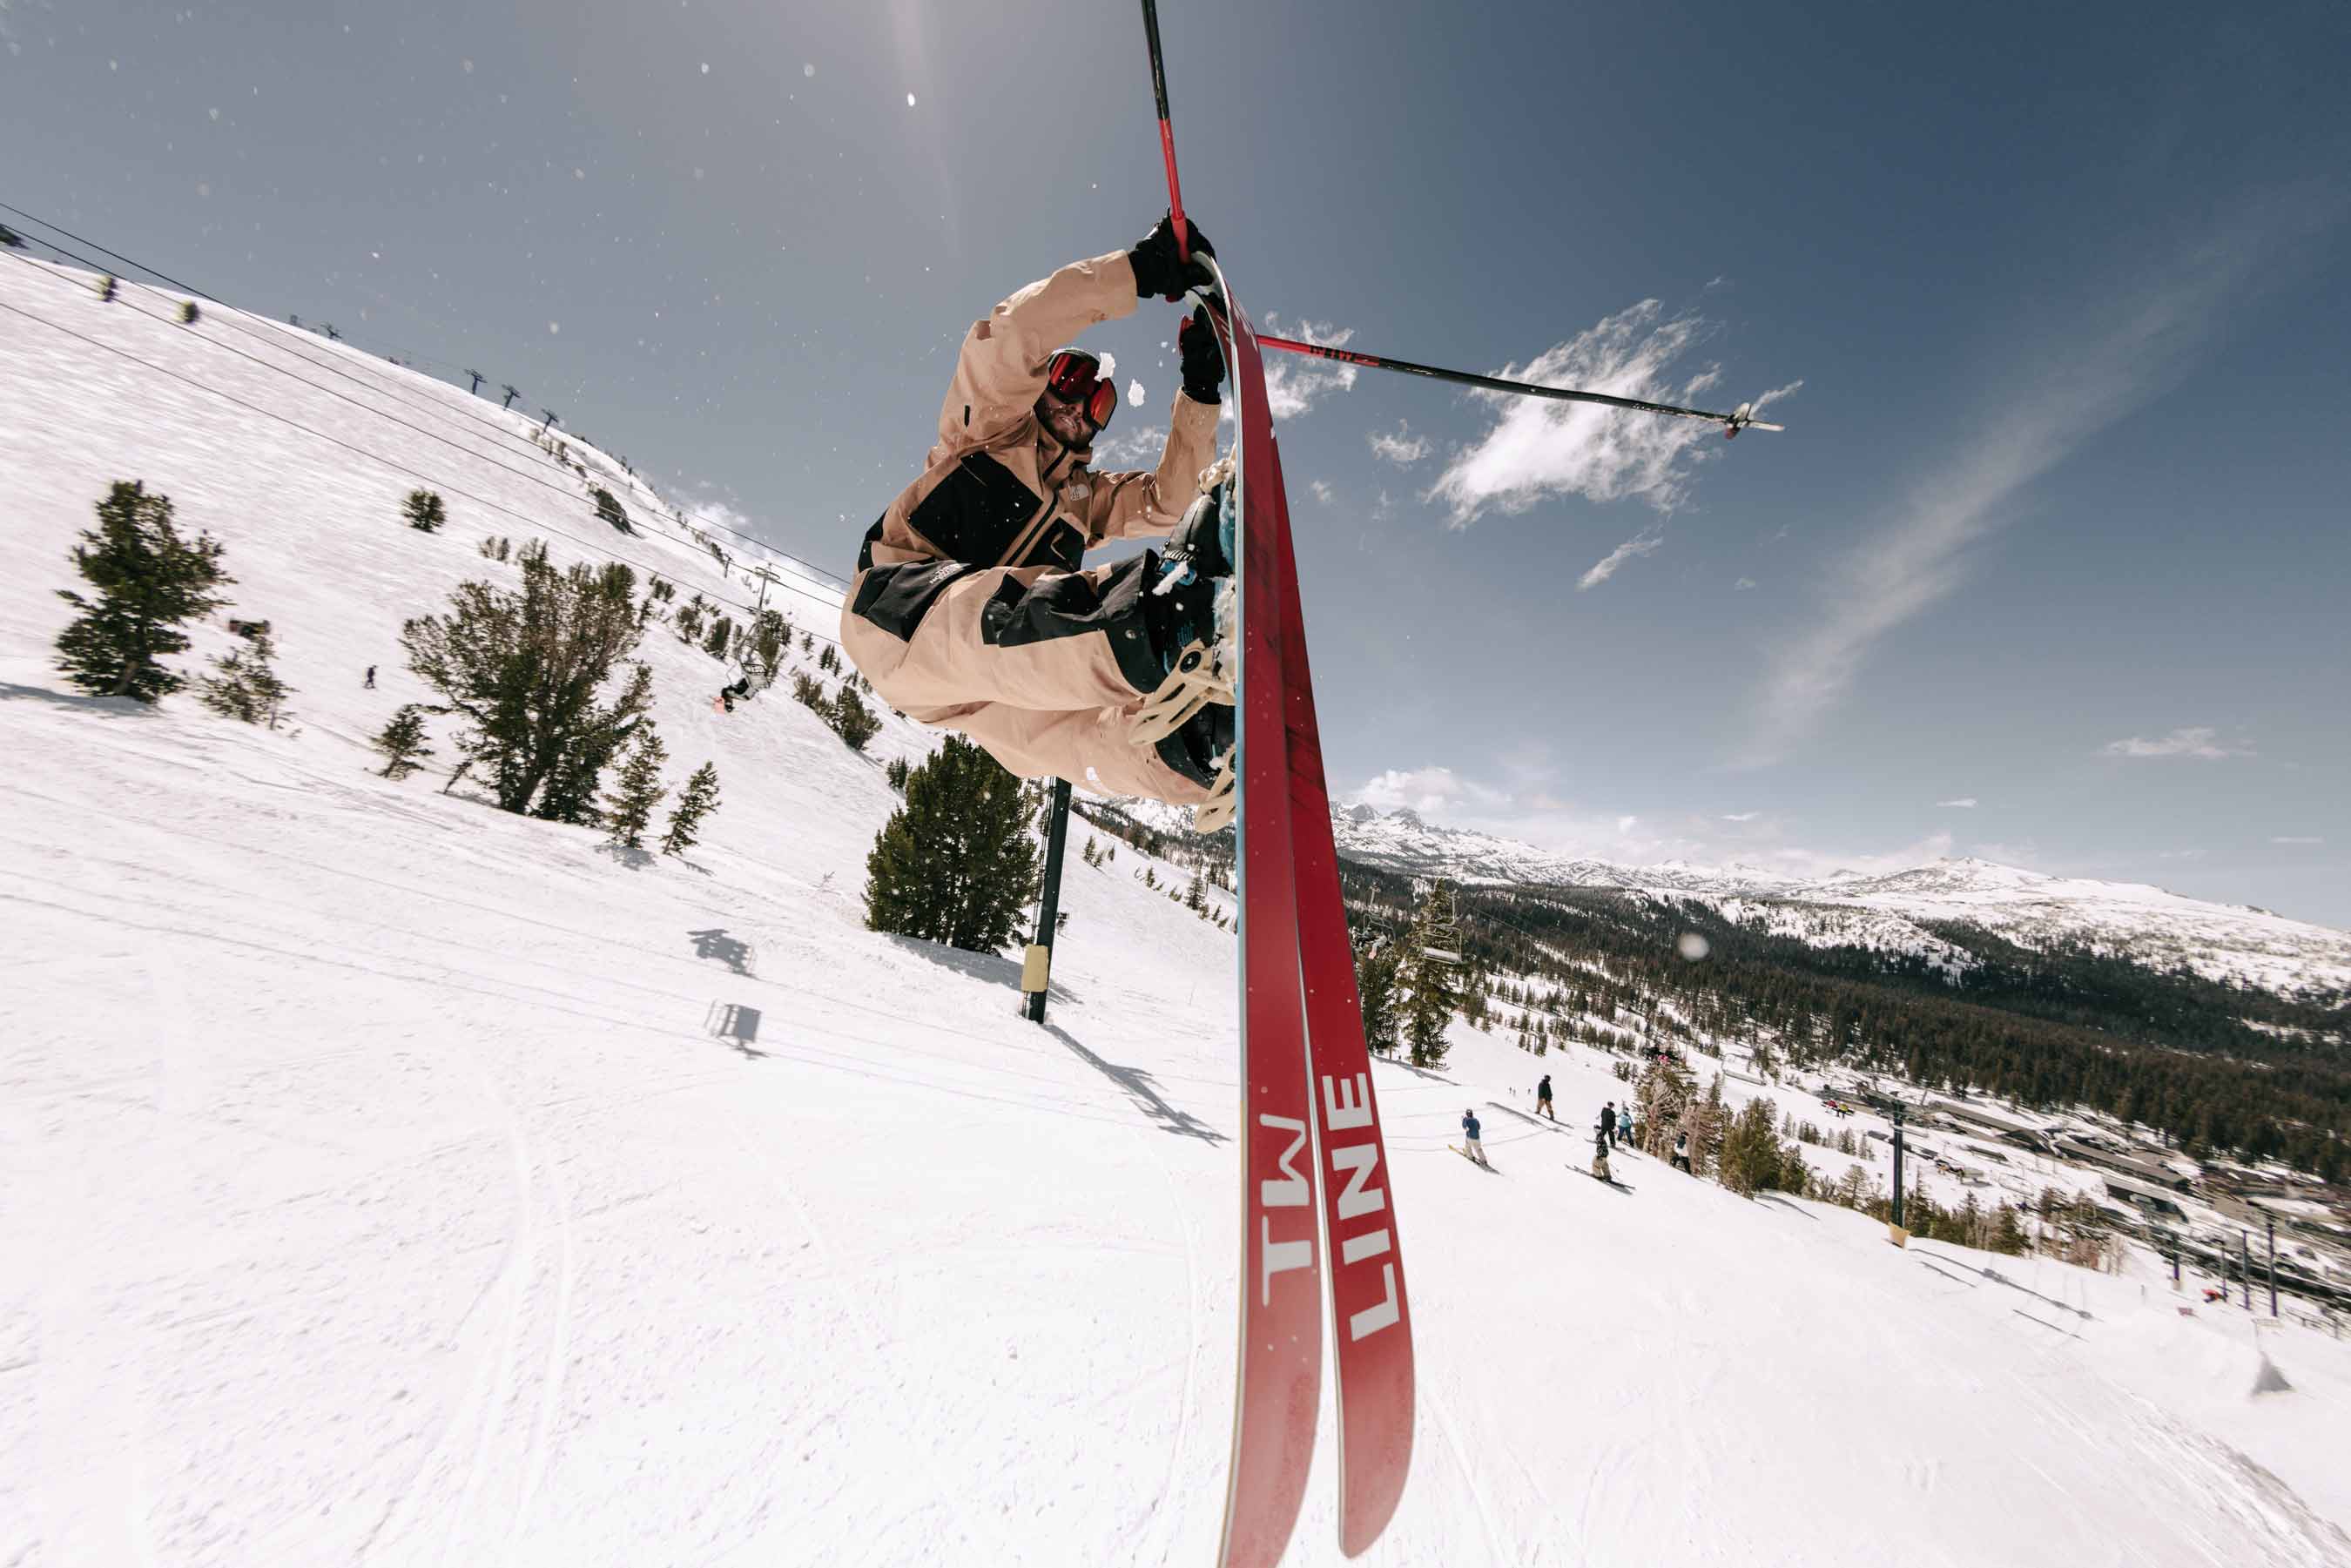 Tom Wallisch skiing in Mammoth wearing the Megalith Snow Goggle